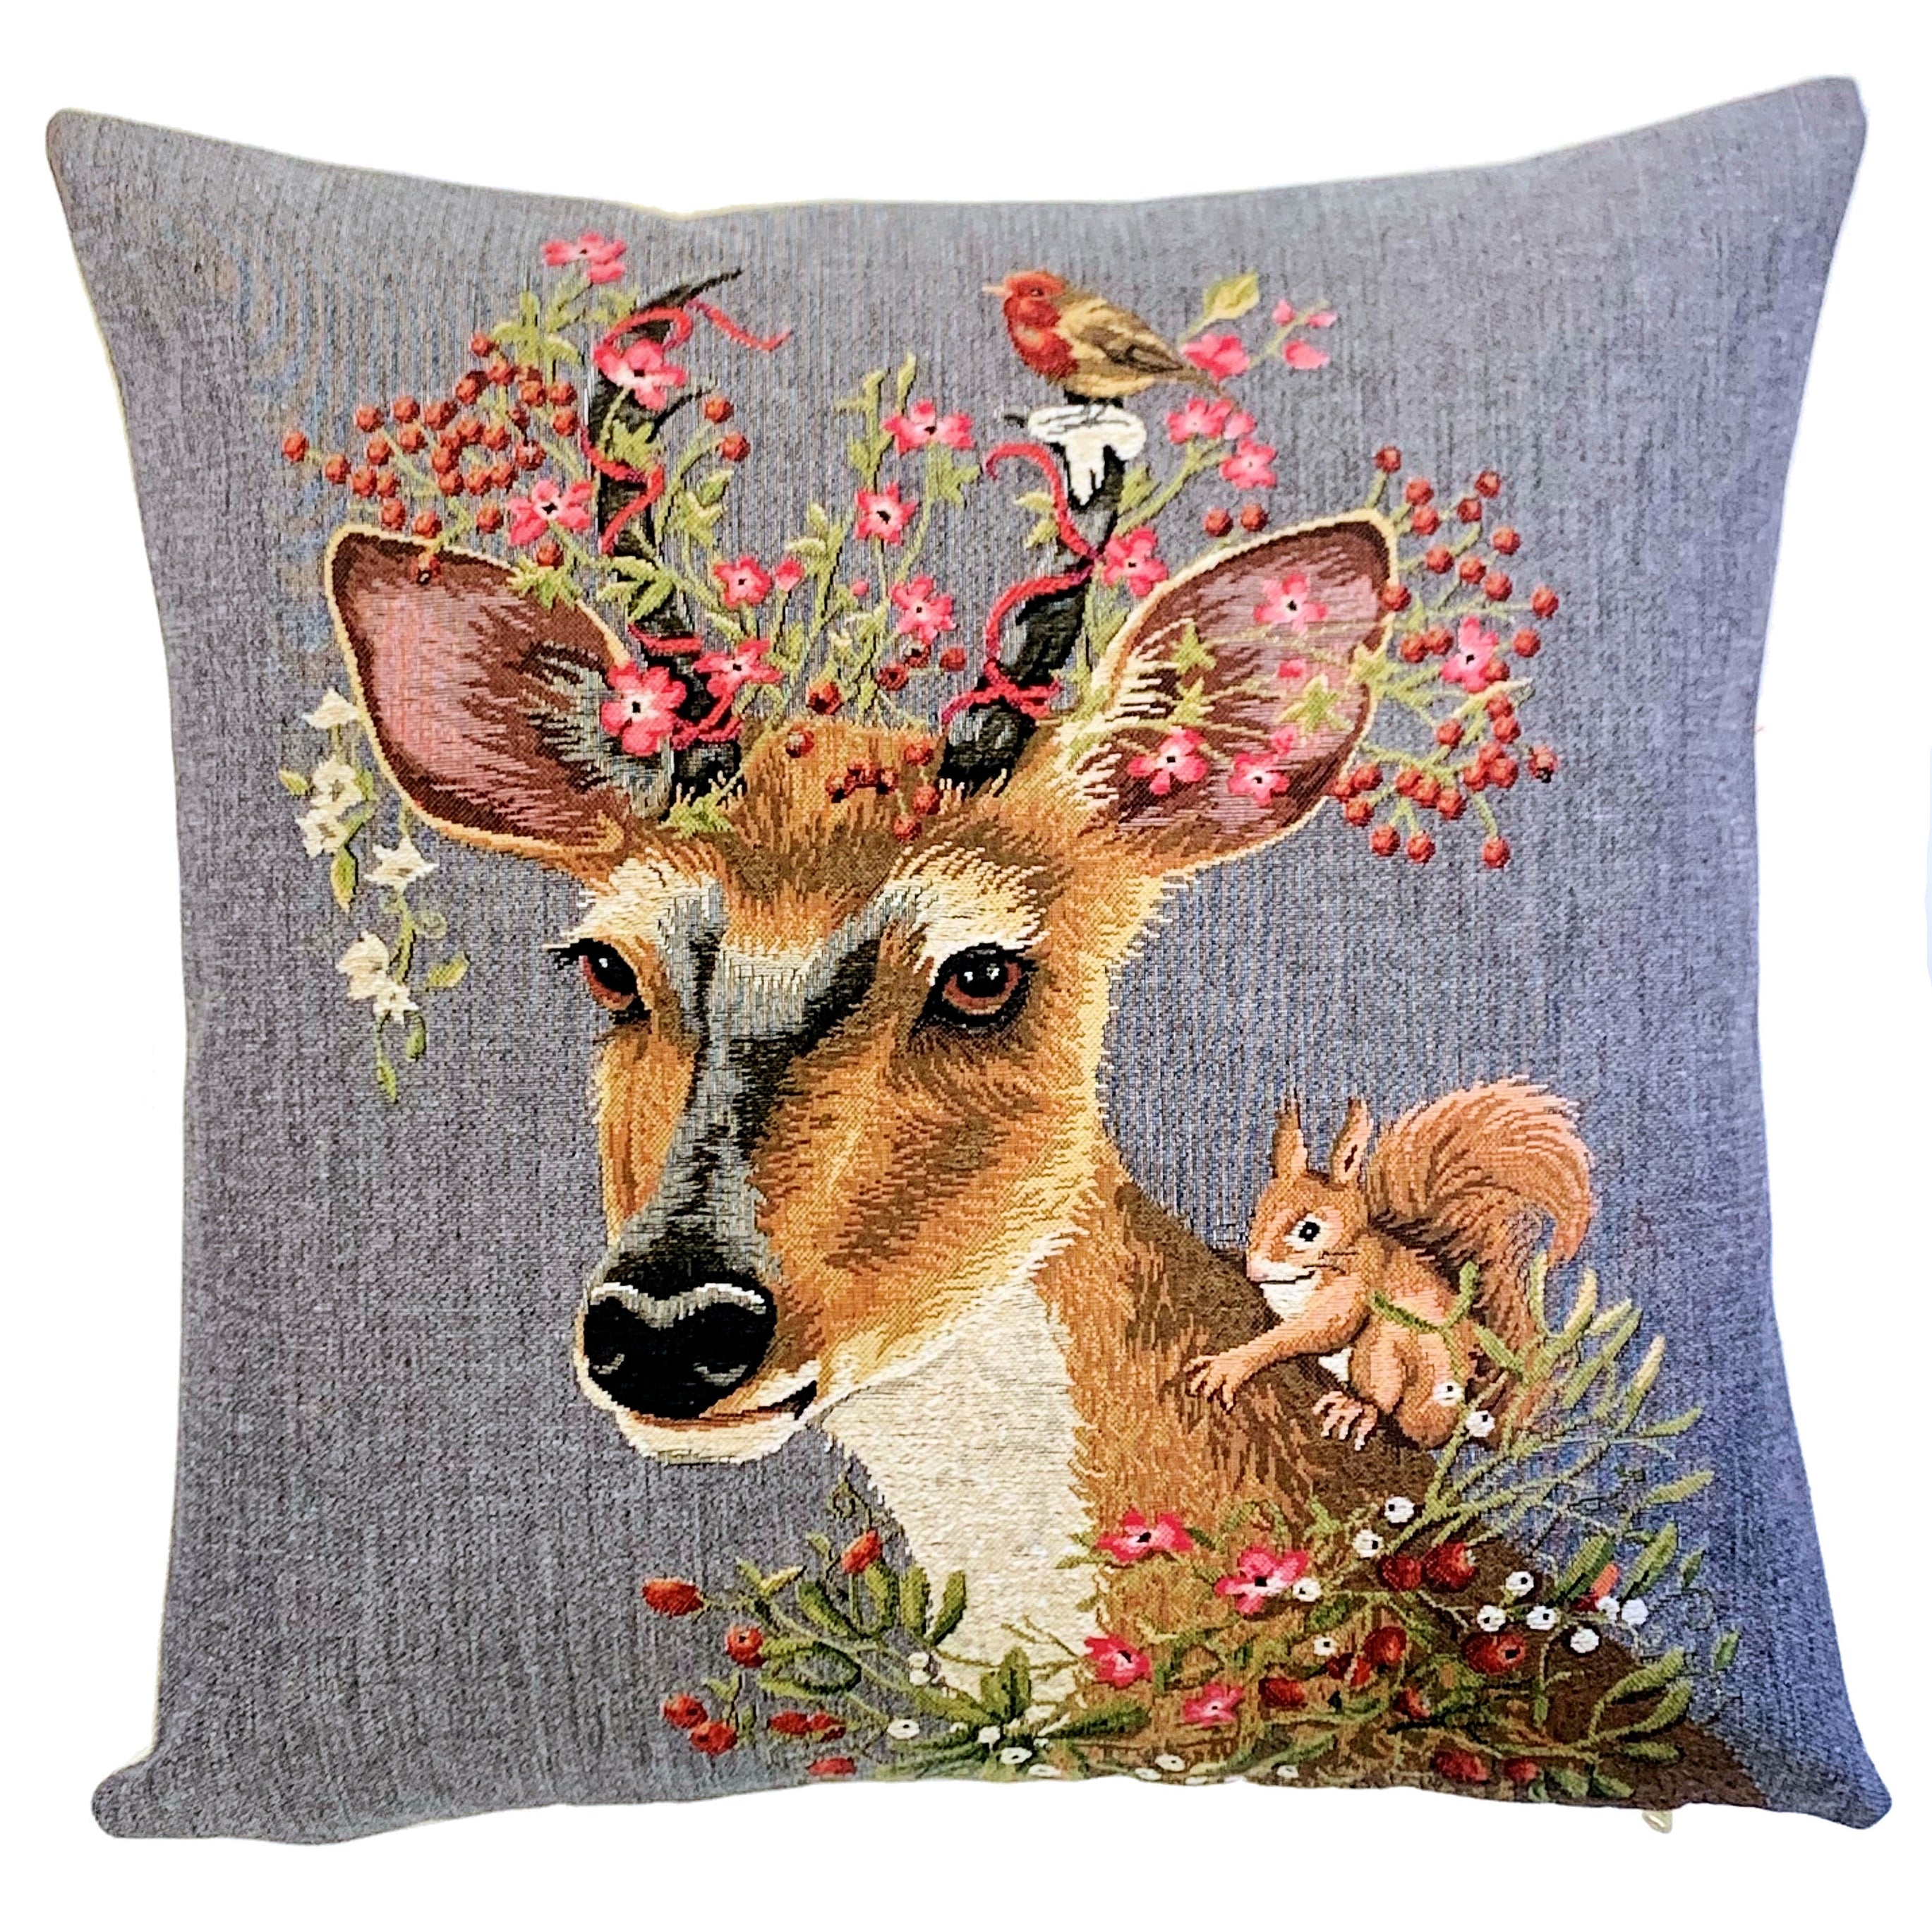 Deer with Squirrel Throw Pillow - Grey